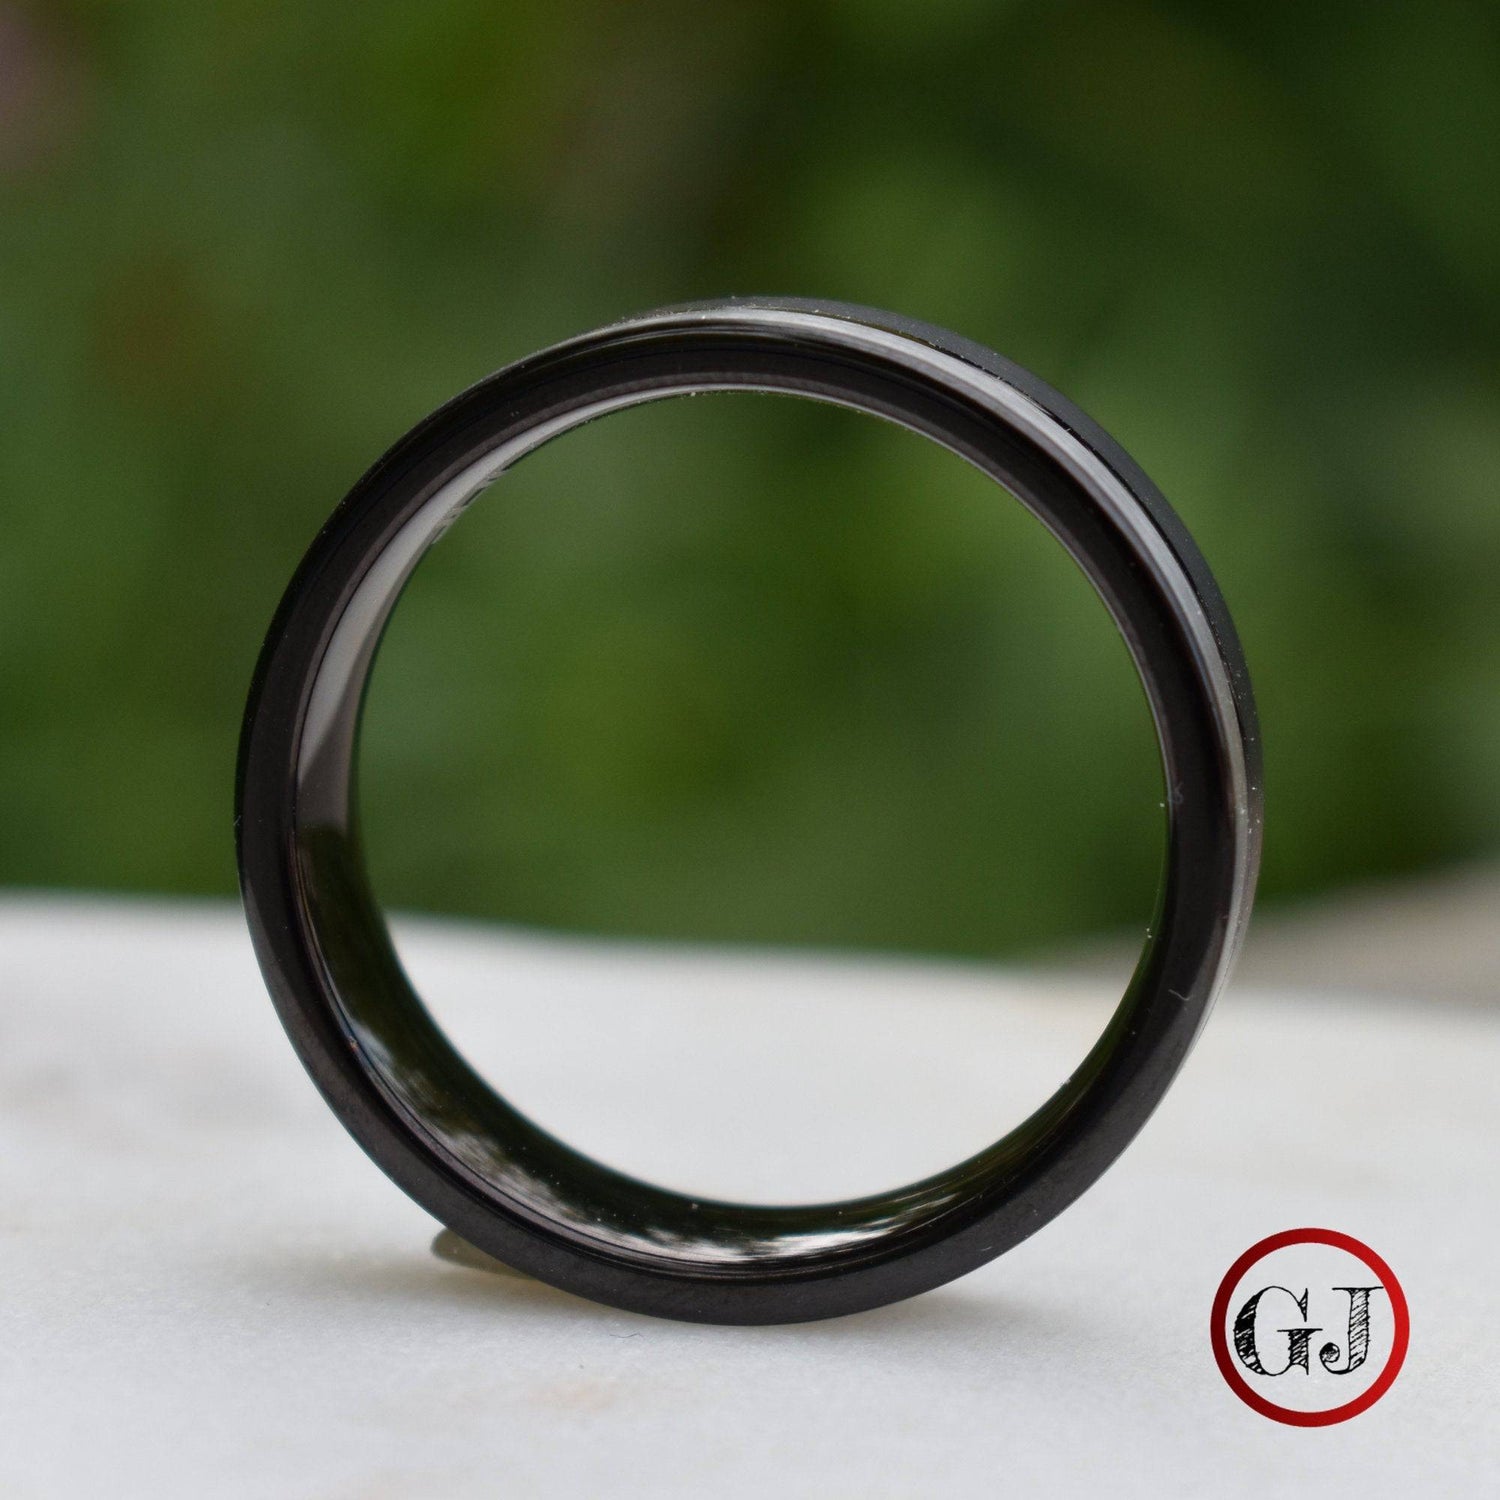 Tungsten Ring 8mm Black and Silver Brushed with Polished Silver Accent - Tungsten Titans